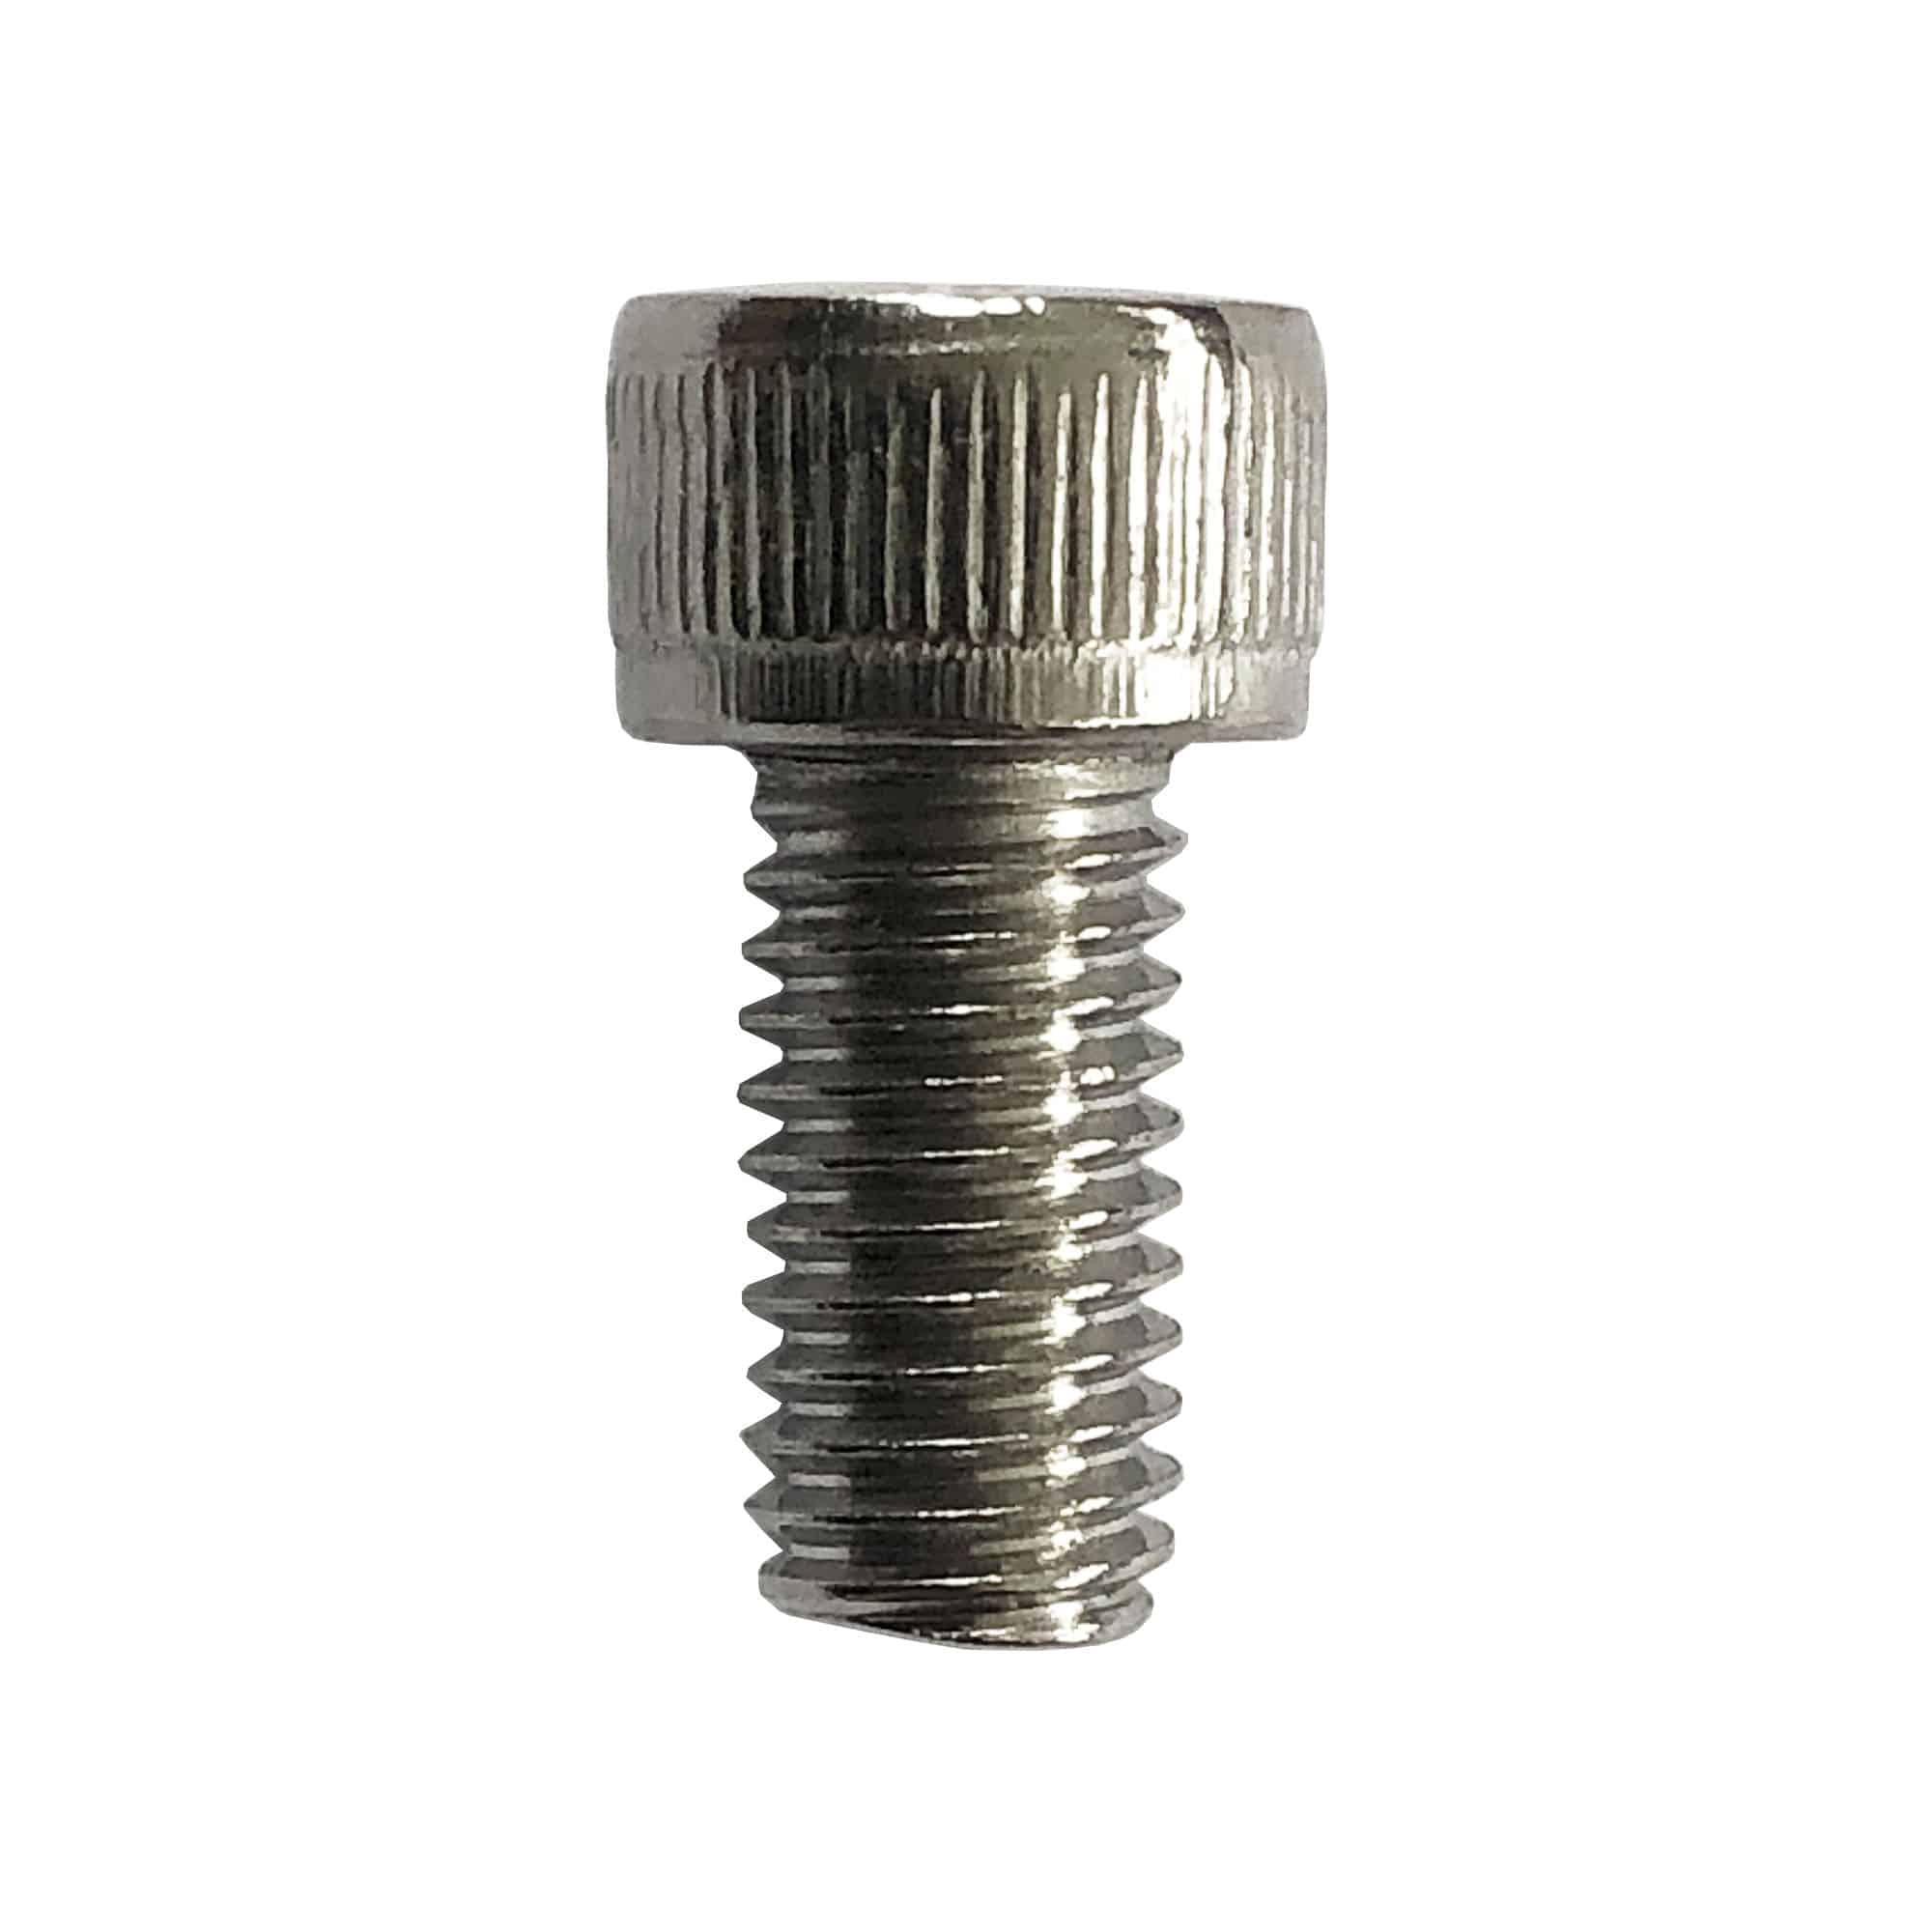 How to Use Allen Key Bolt Cap Screws in Furniture Assembly - Speciality  Metals